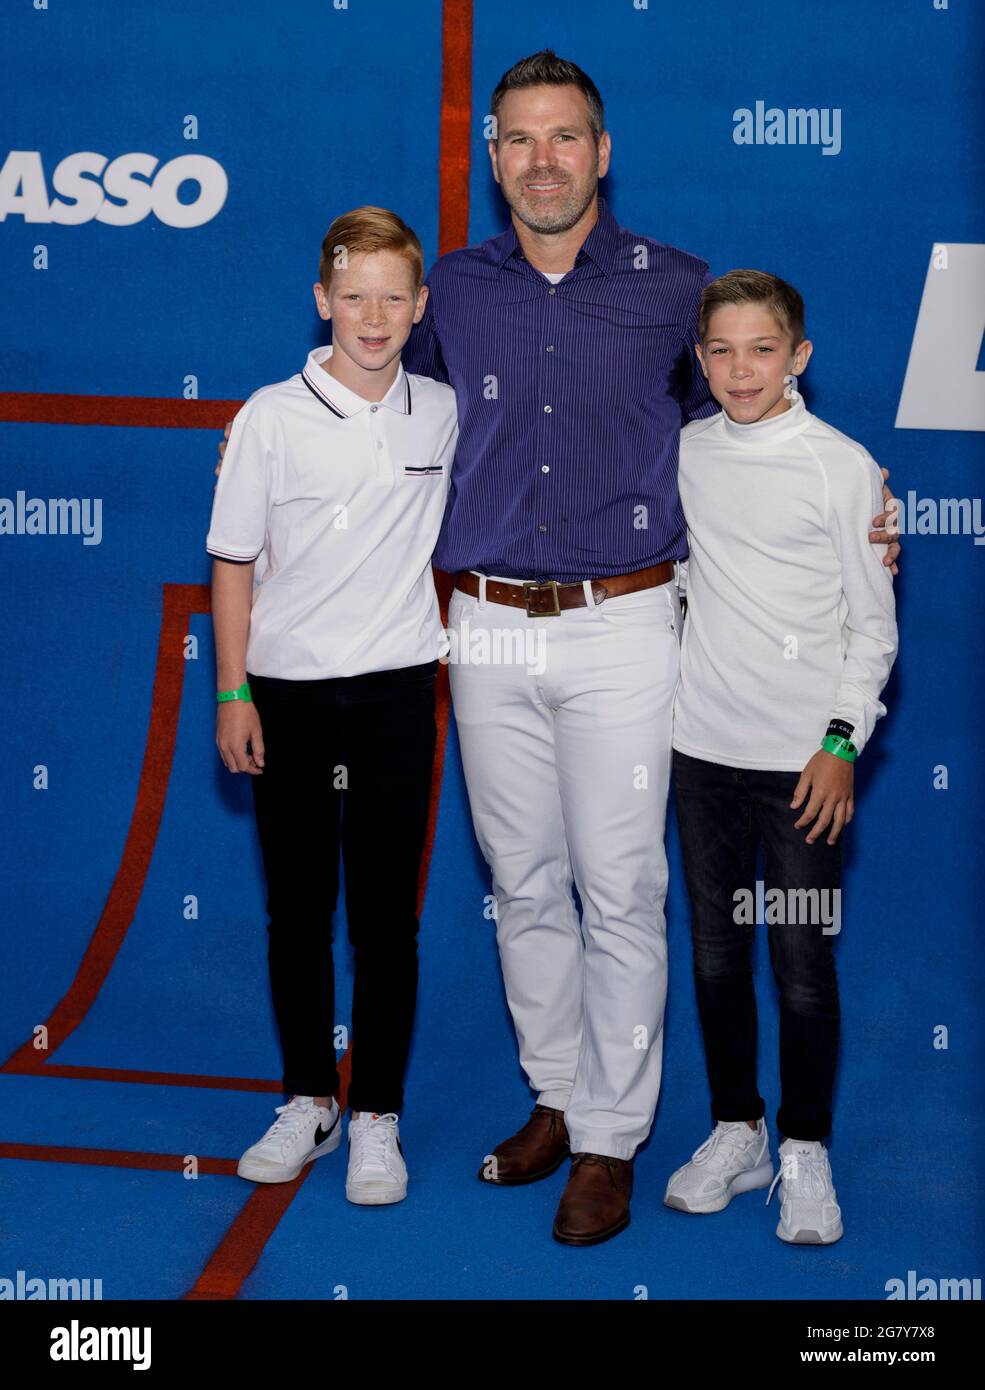 WEST HOLLYWOOD, CALIFORNIA - JULY 15, 2021: US former soccer player and LA Galaxy Greg Vanney (C) attends Apple's 'Ted Lasso' Season 2 Premiere at Pac Stock Photo